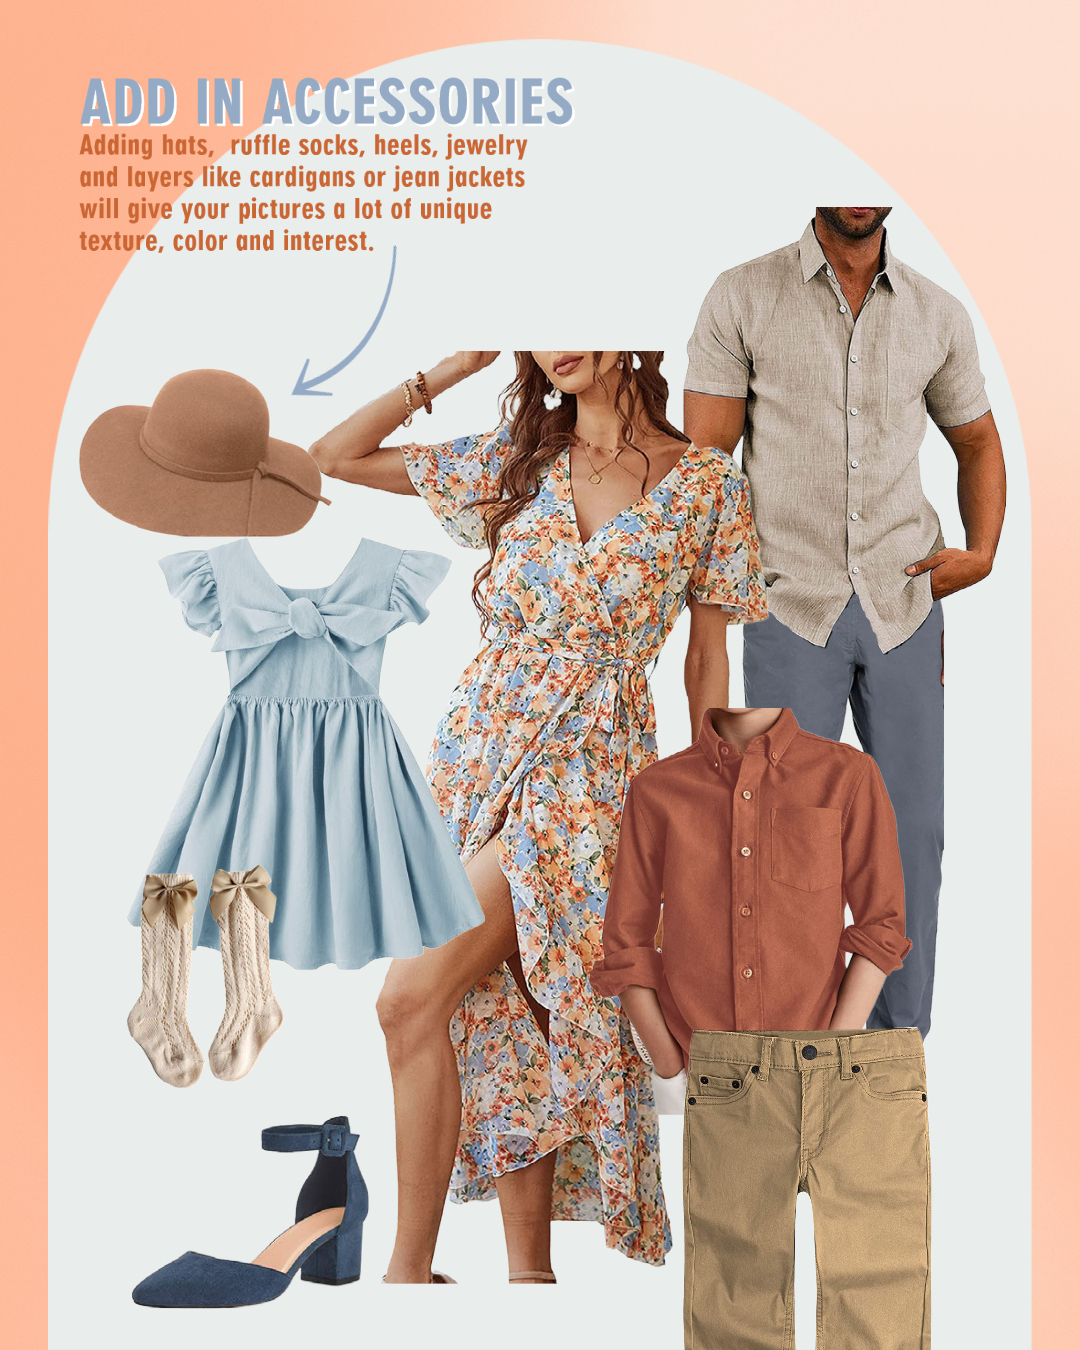 Family Photography Outfit Inspiration for Spring Family Pictures - add in accessories